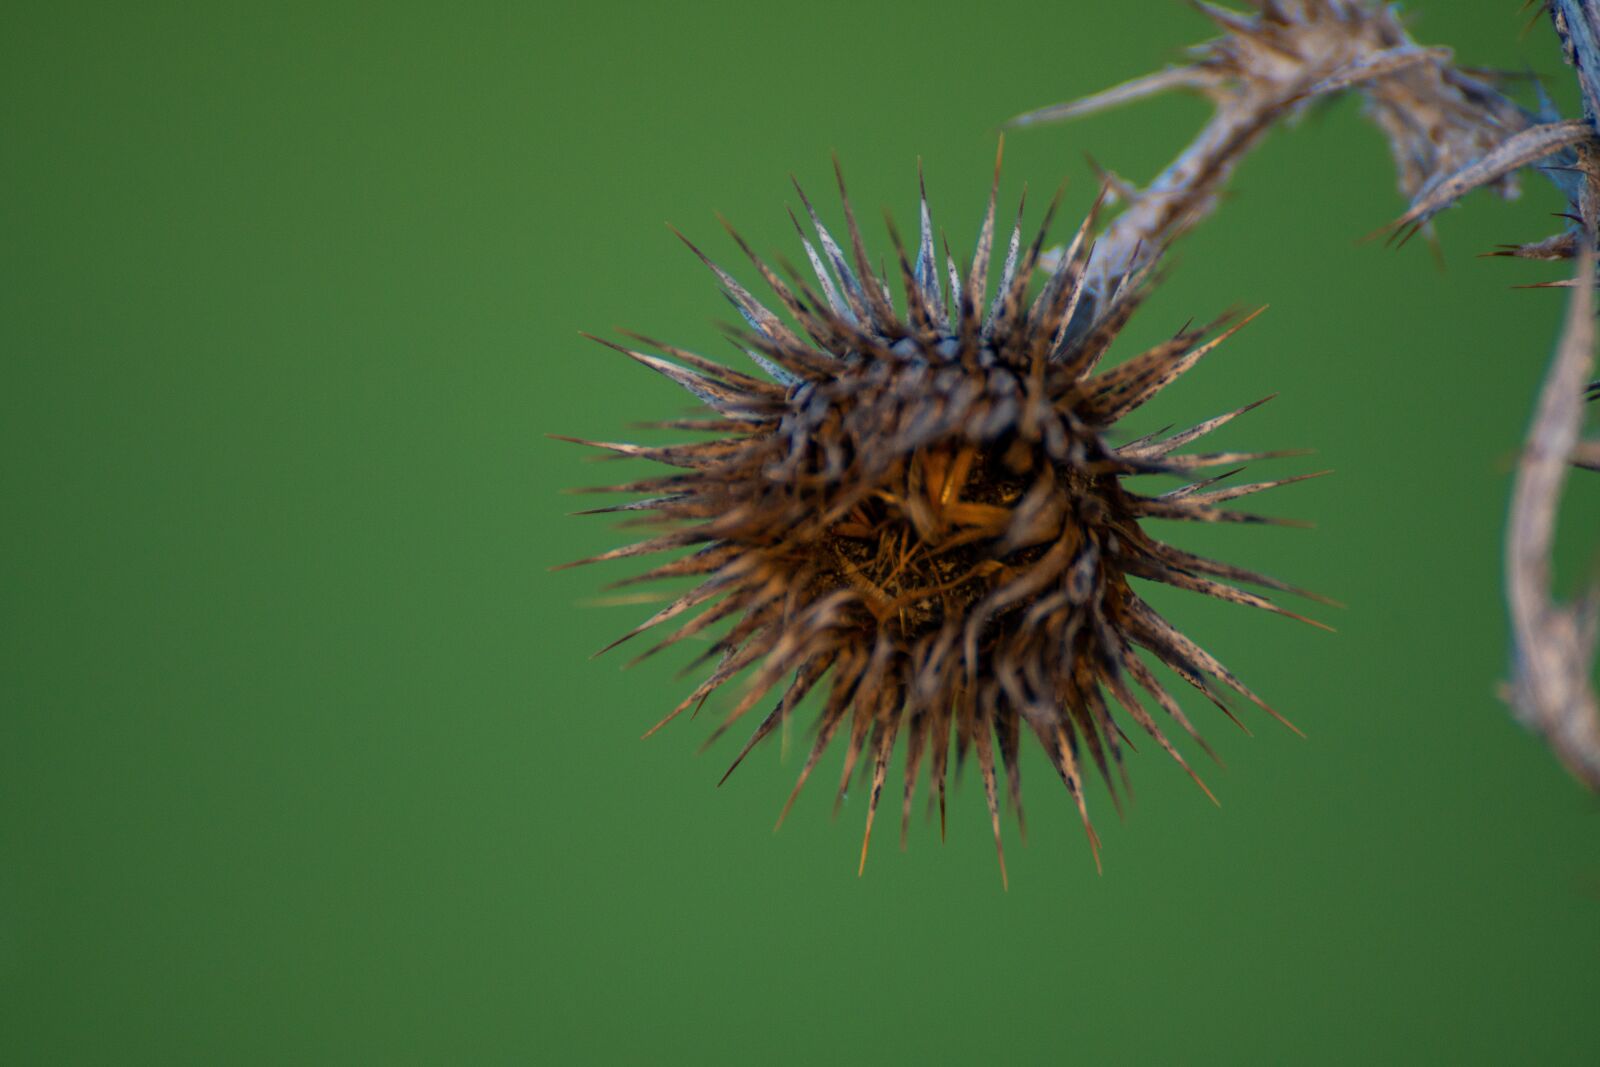 Sony a6500 + Sony DT 50mm F1.8 SAM sample photo. Thistle, dry flower, thorny photography